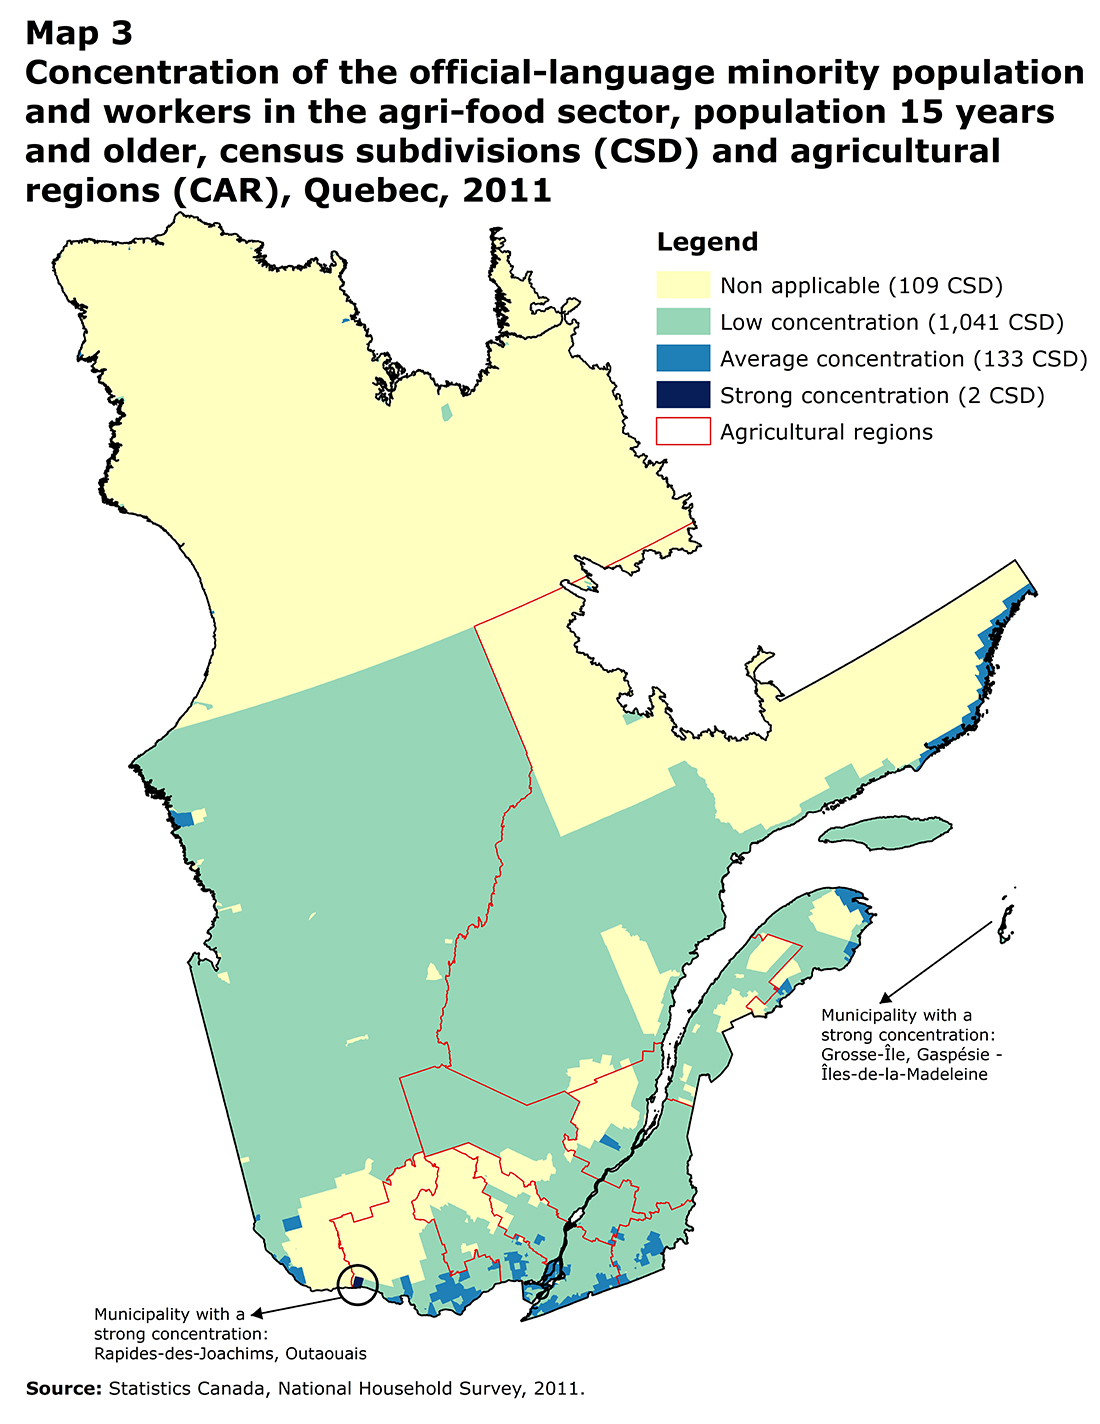 Map 3 Concentration of the official-language minority population and workers in the agri-food sector, population 15 years and older, census subdivisions (CSD) and agricultural regions (CAR), Quebec, 2011